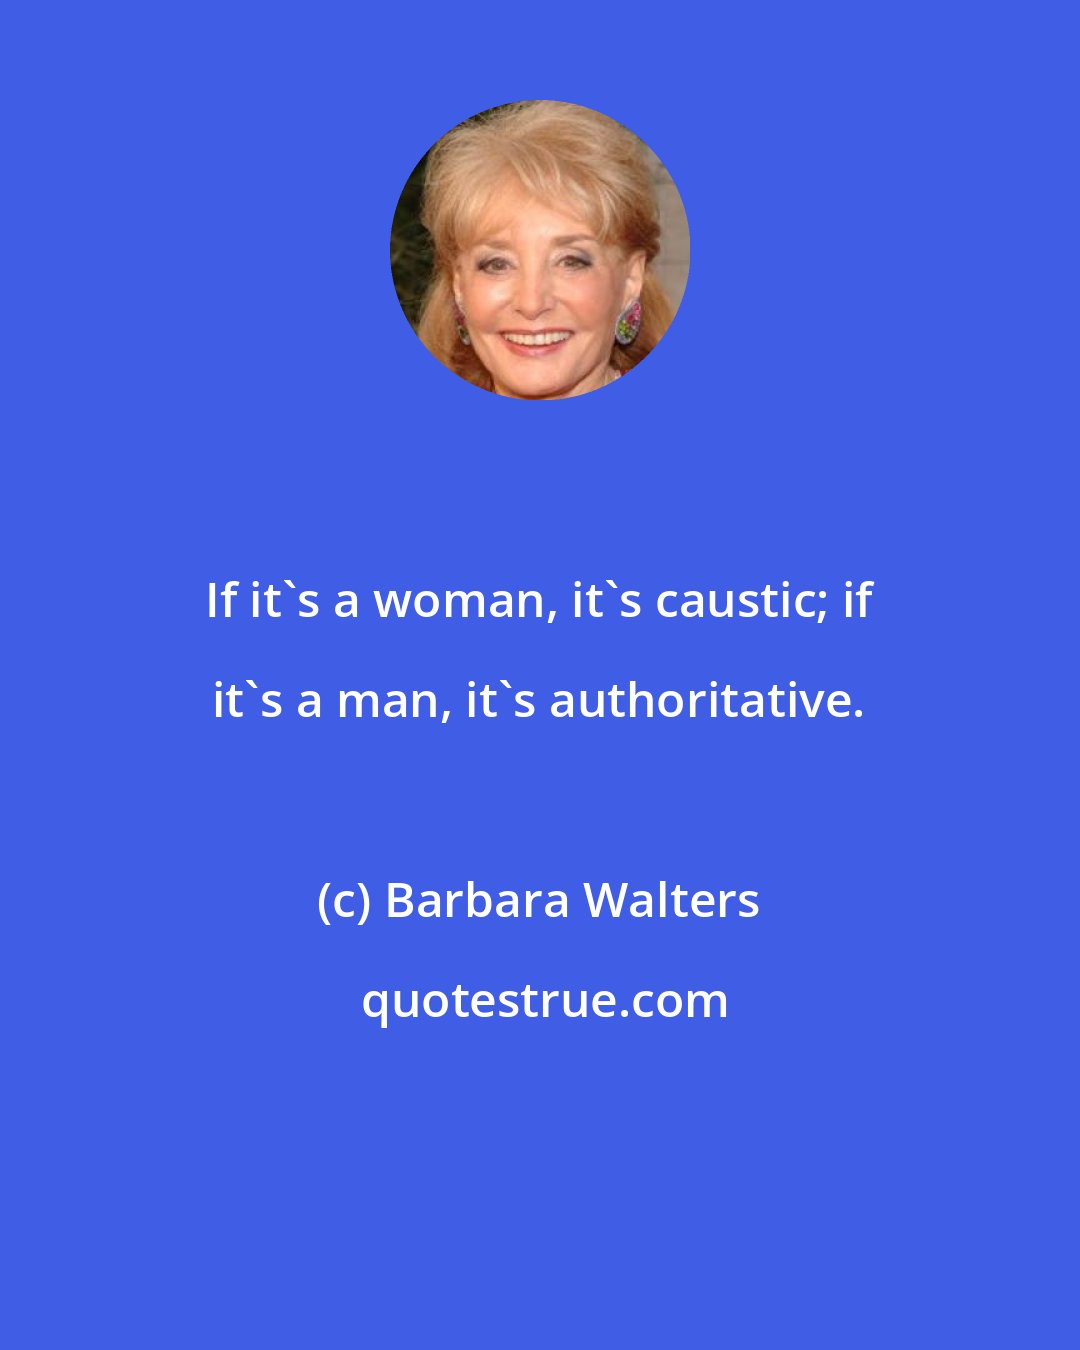 Barbara Walters: If it's a woman, it's caustic; if it's a man, it's authoritative.